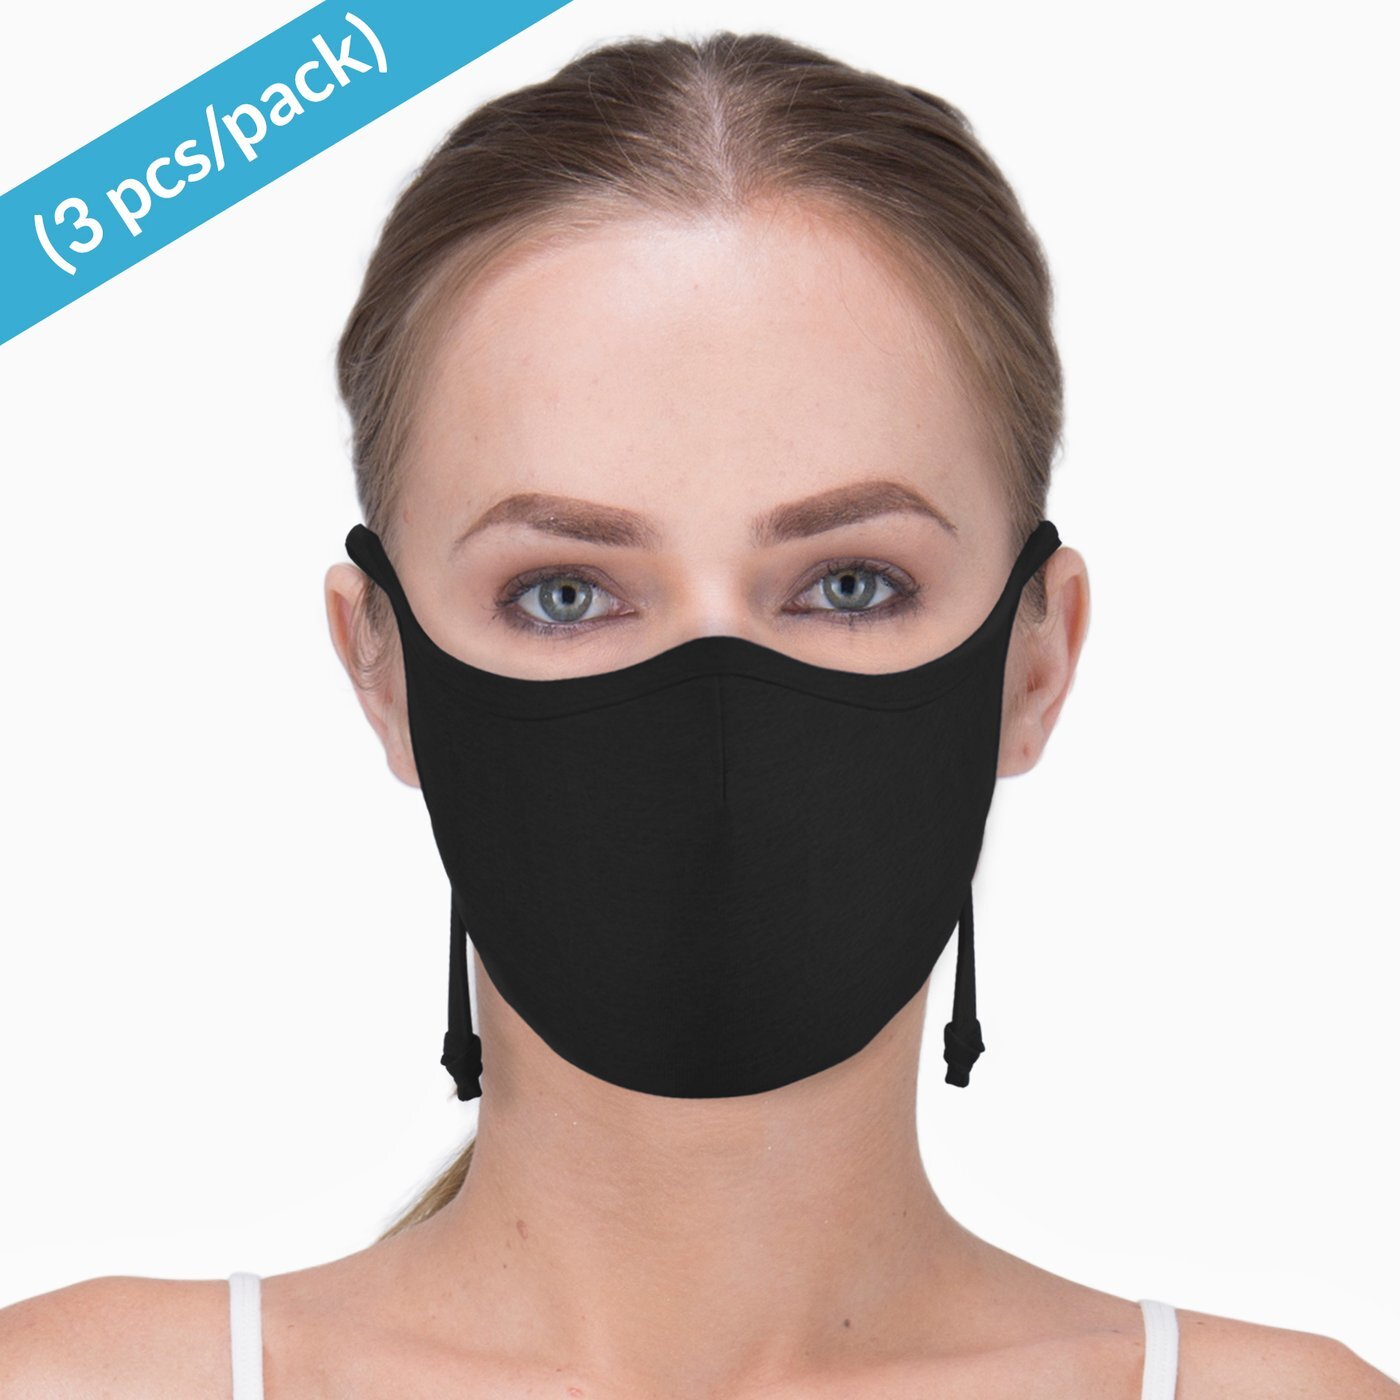 Cottonique Hypoallergenic Face Mask with Adjustable Earloops